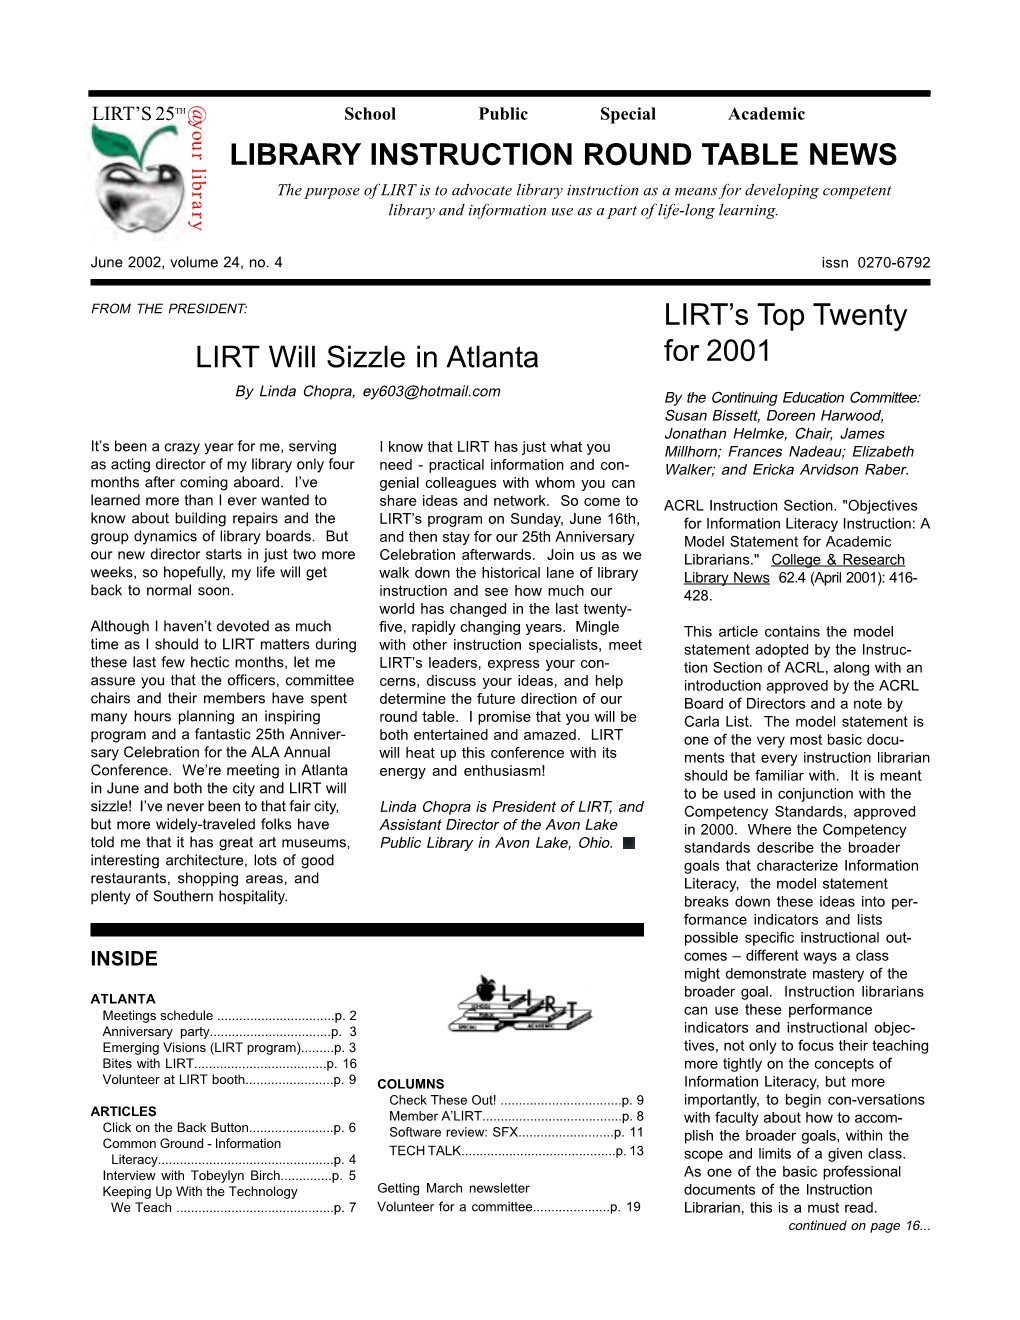 LIBRARY INSTRUCTION ROUND TABLE NEWS LIRT Will Sizzle In